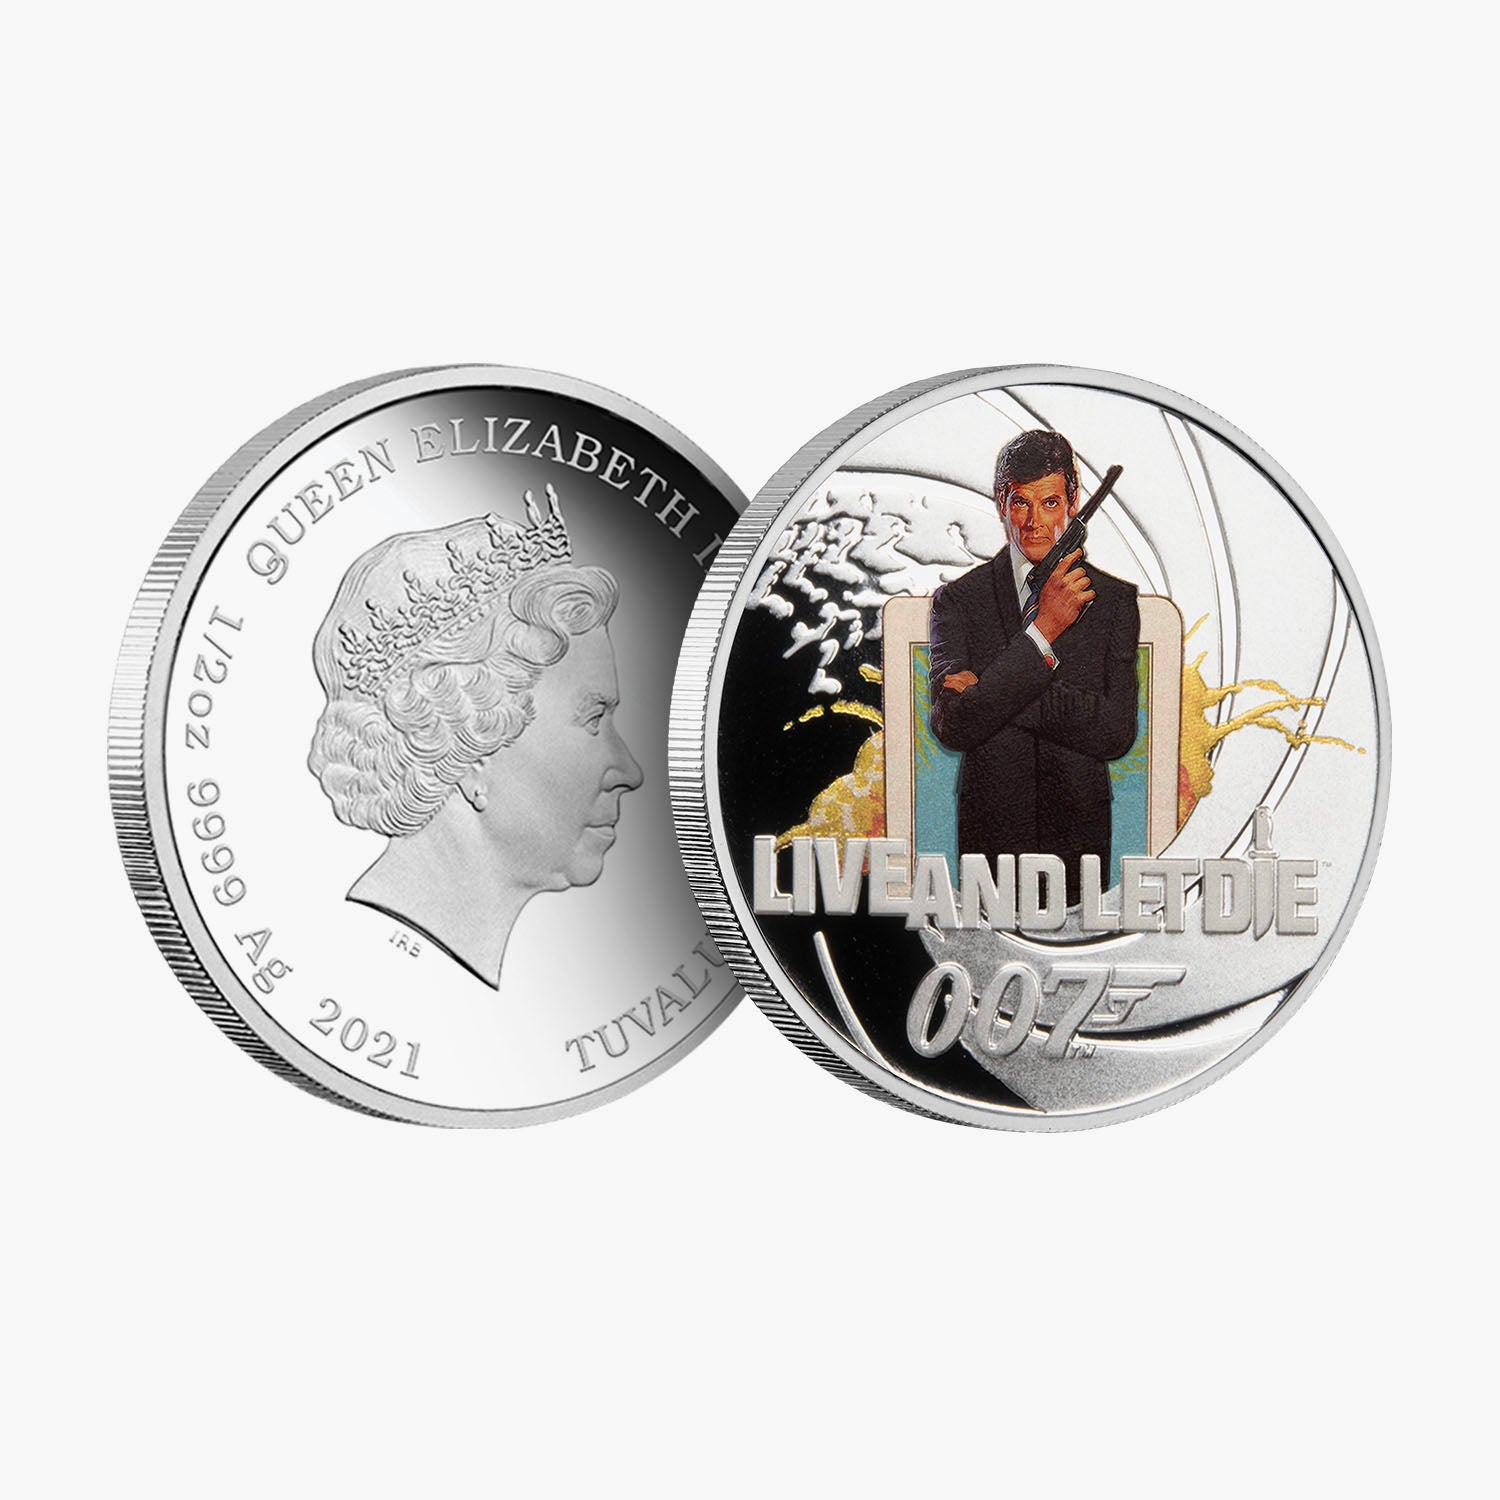 James Bond - Live and Let Die Solid Silver Movie Coin